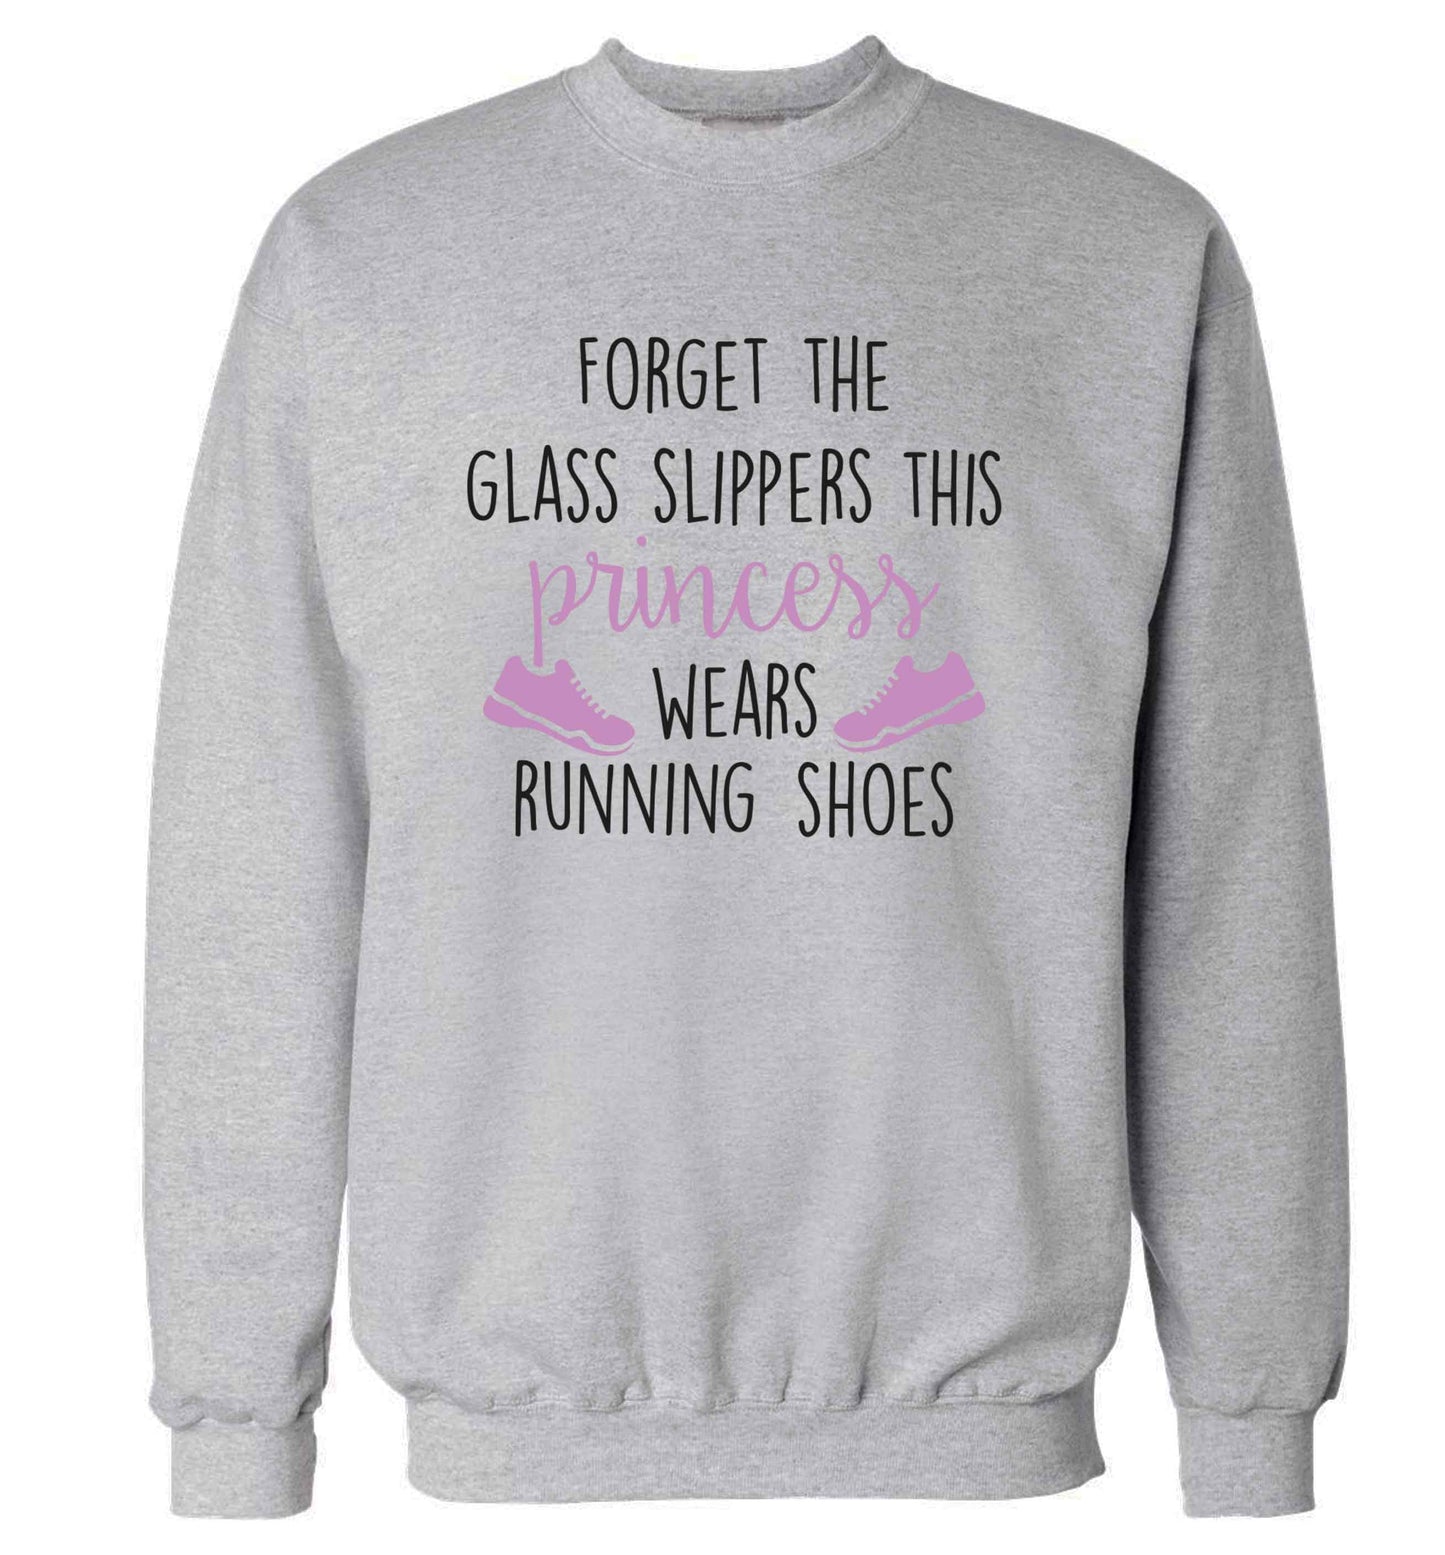 Forget the glass slippers this princess wears running shoes adult's unisex grey sweater 2XL